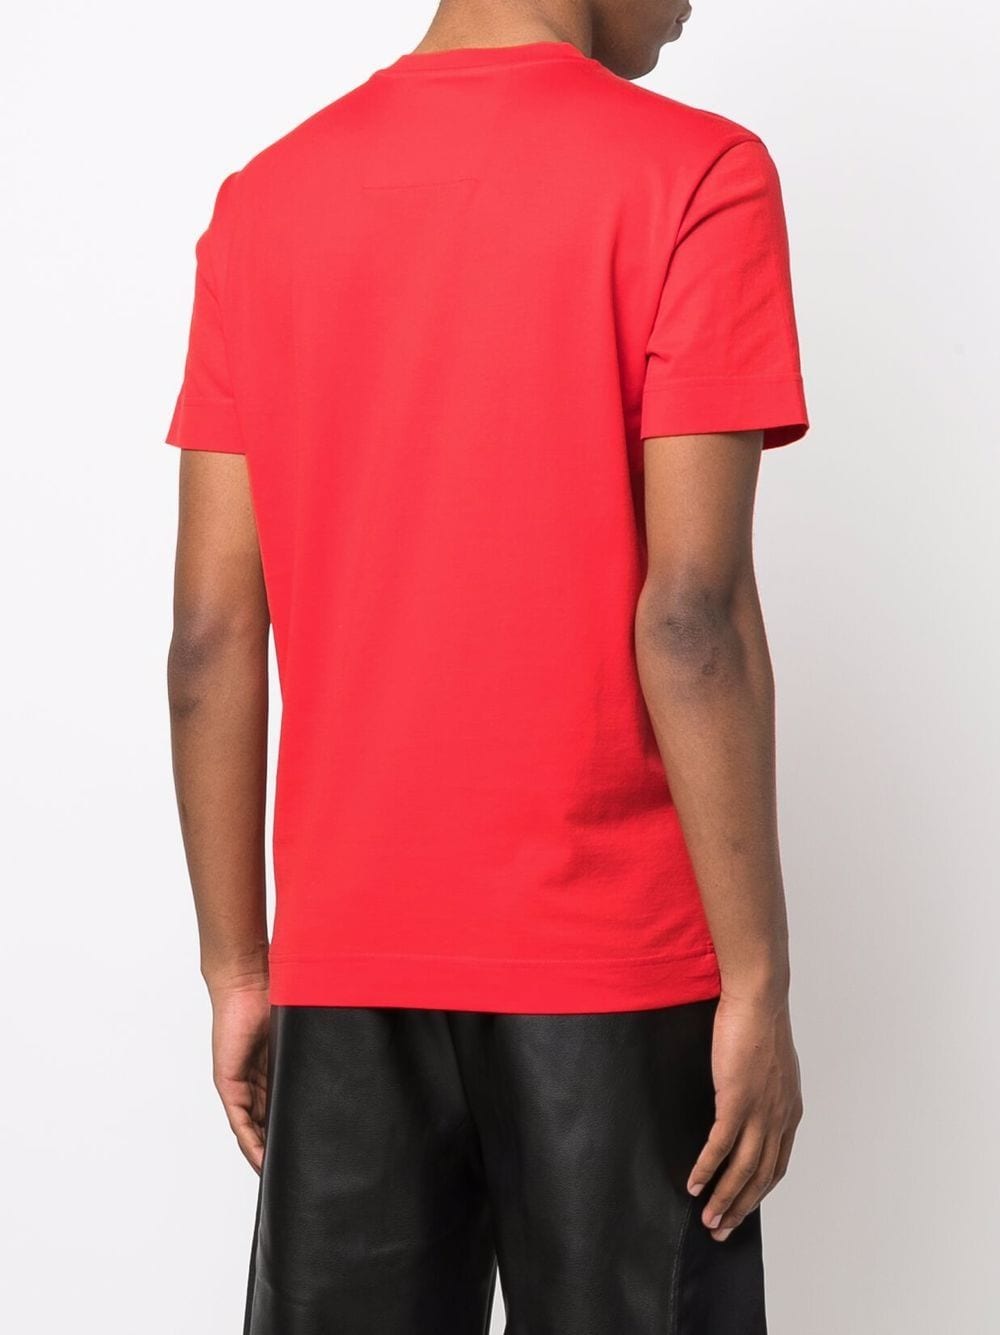 Shop Givenchy x Chito tufted logo T-shirt with Express Delivery - FARFETCH